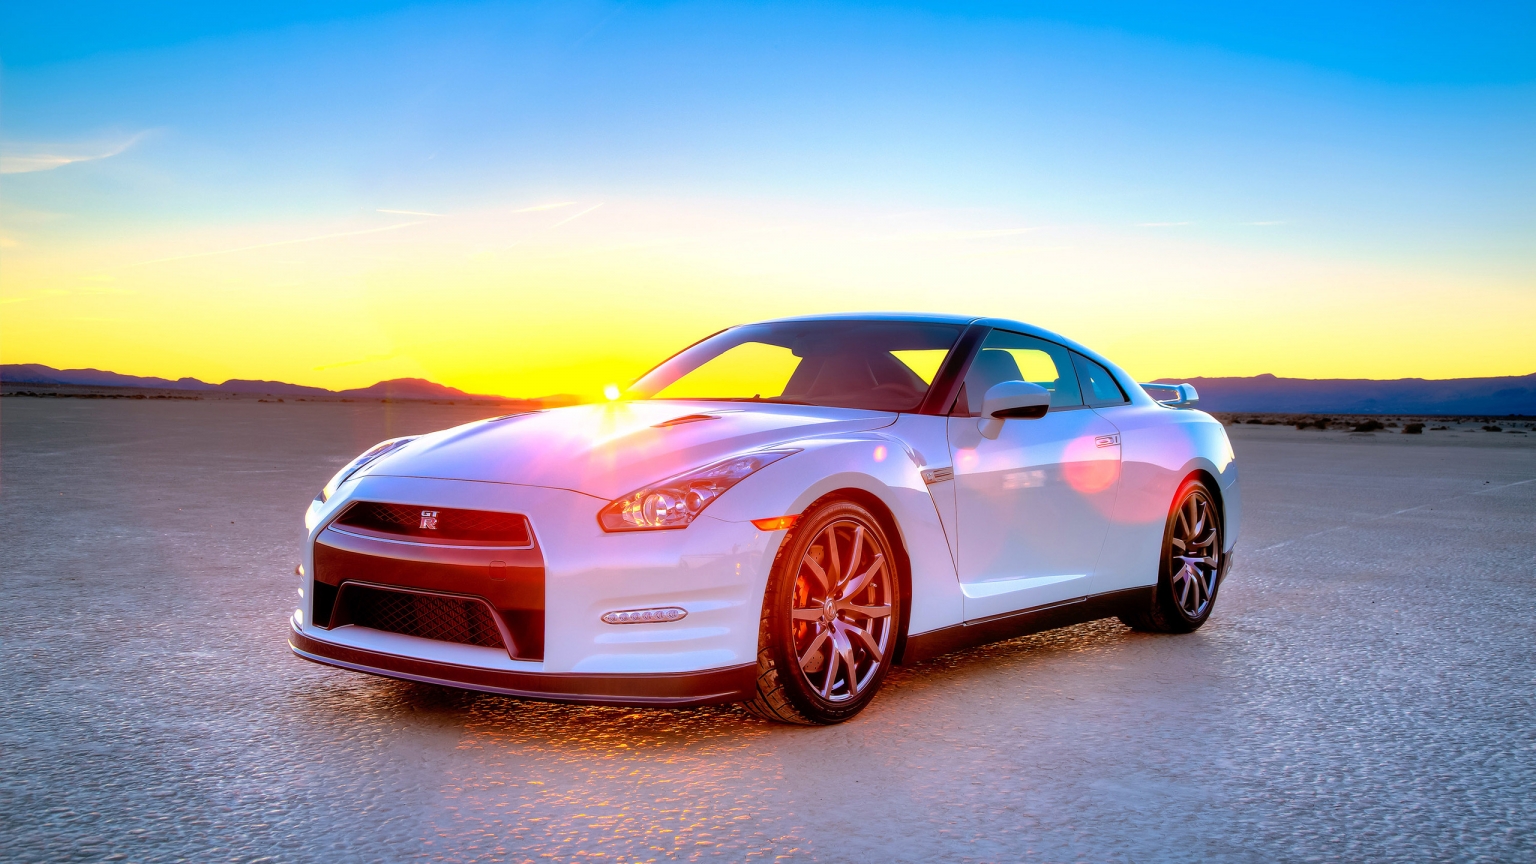 White Nissan GT-R 2014 Edition for 1536 x 864 HDTV resolution